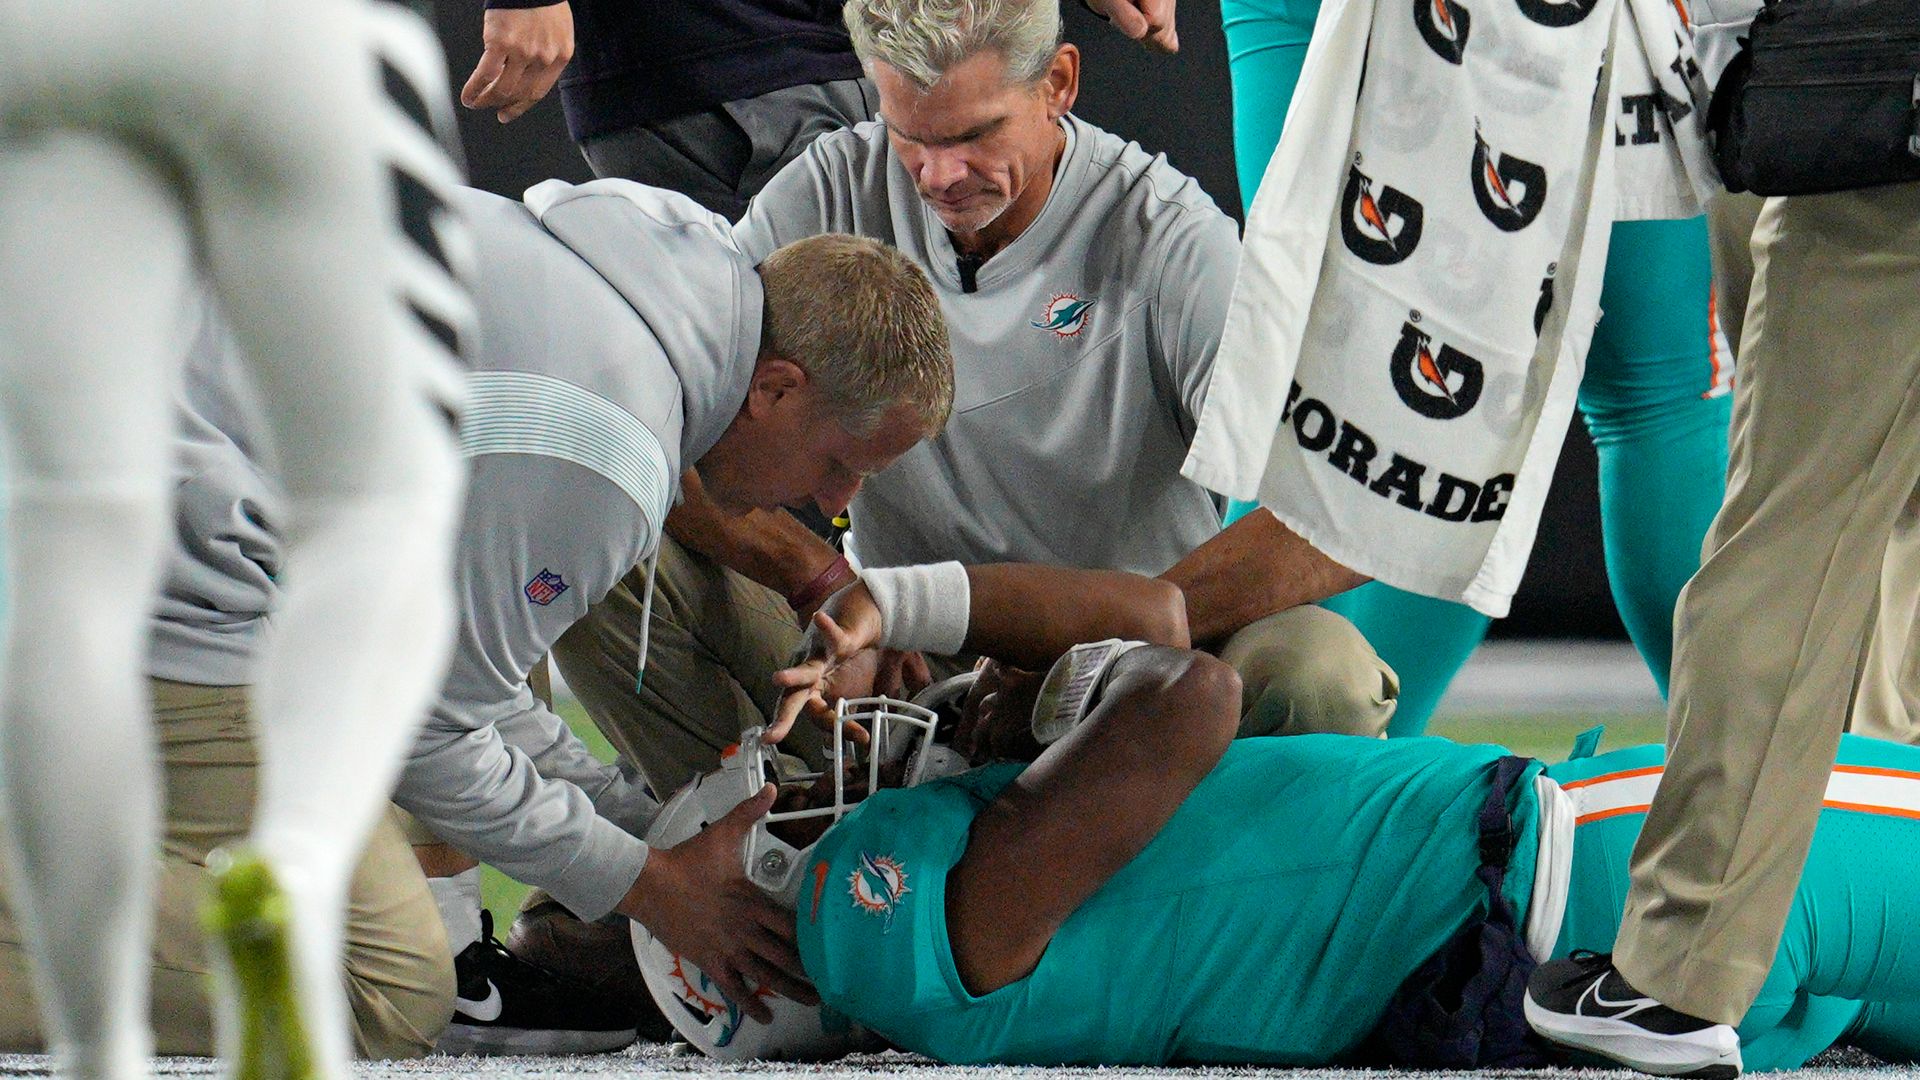 NFL and players association agree to enhanced concussion protocols